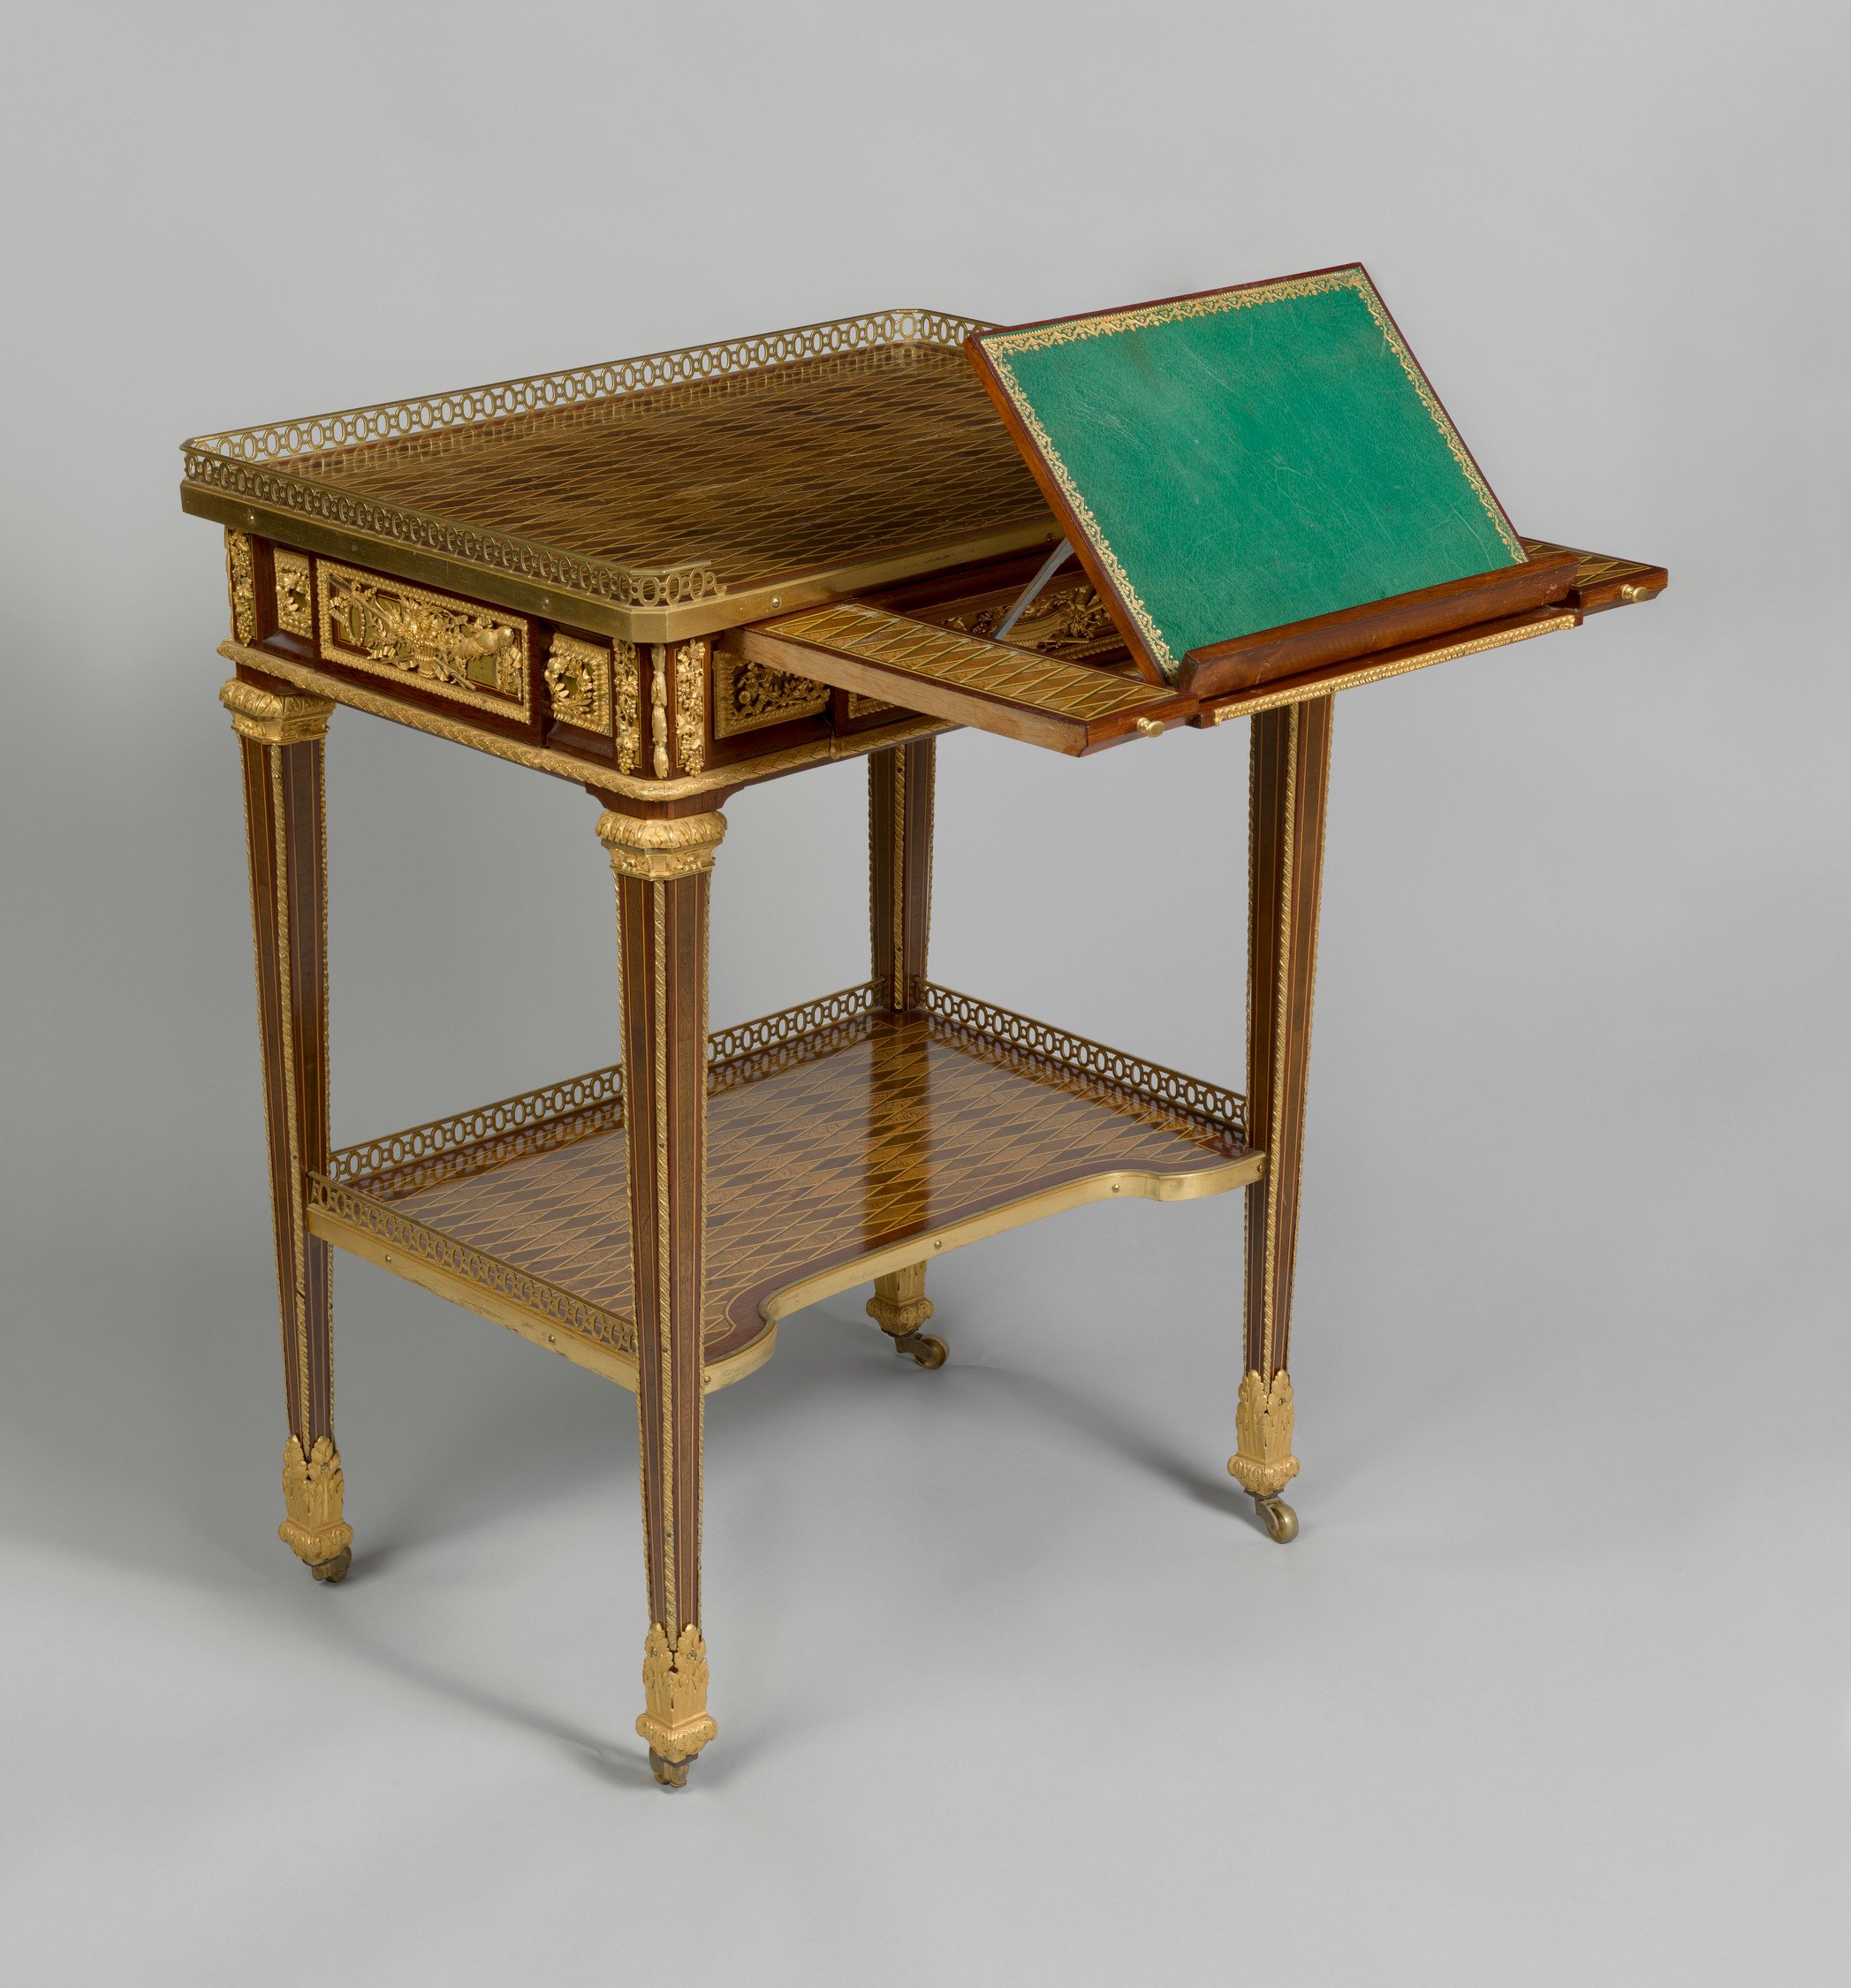 The rectangular trellis parquetry top with pierced three-quarter gilt bronze gallery above a&nbsp;panelled frieze with&nbsp;a drawer&nbsp;on one long side incorporating a&nbsp;ratcheted&nbsp;leather-lined writing-slide, and a small pen drawer on the right